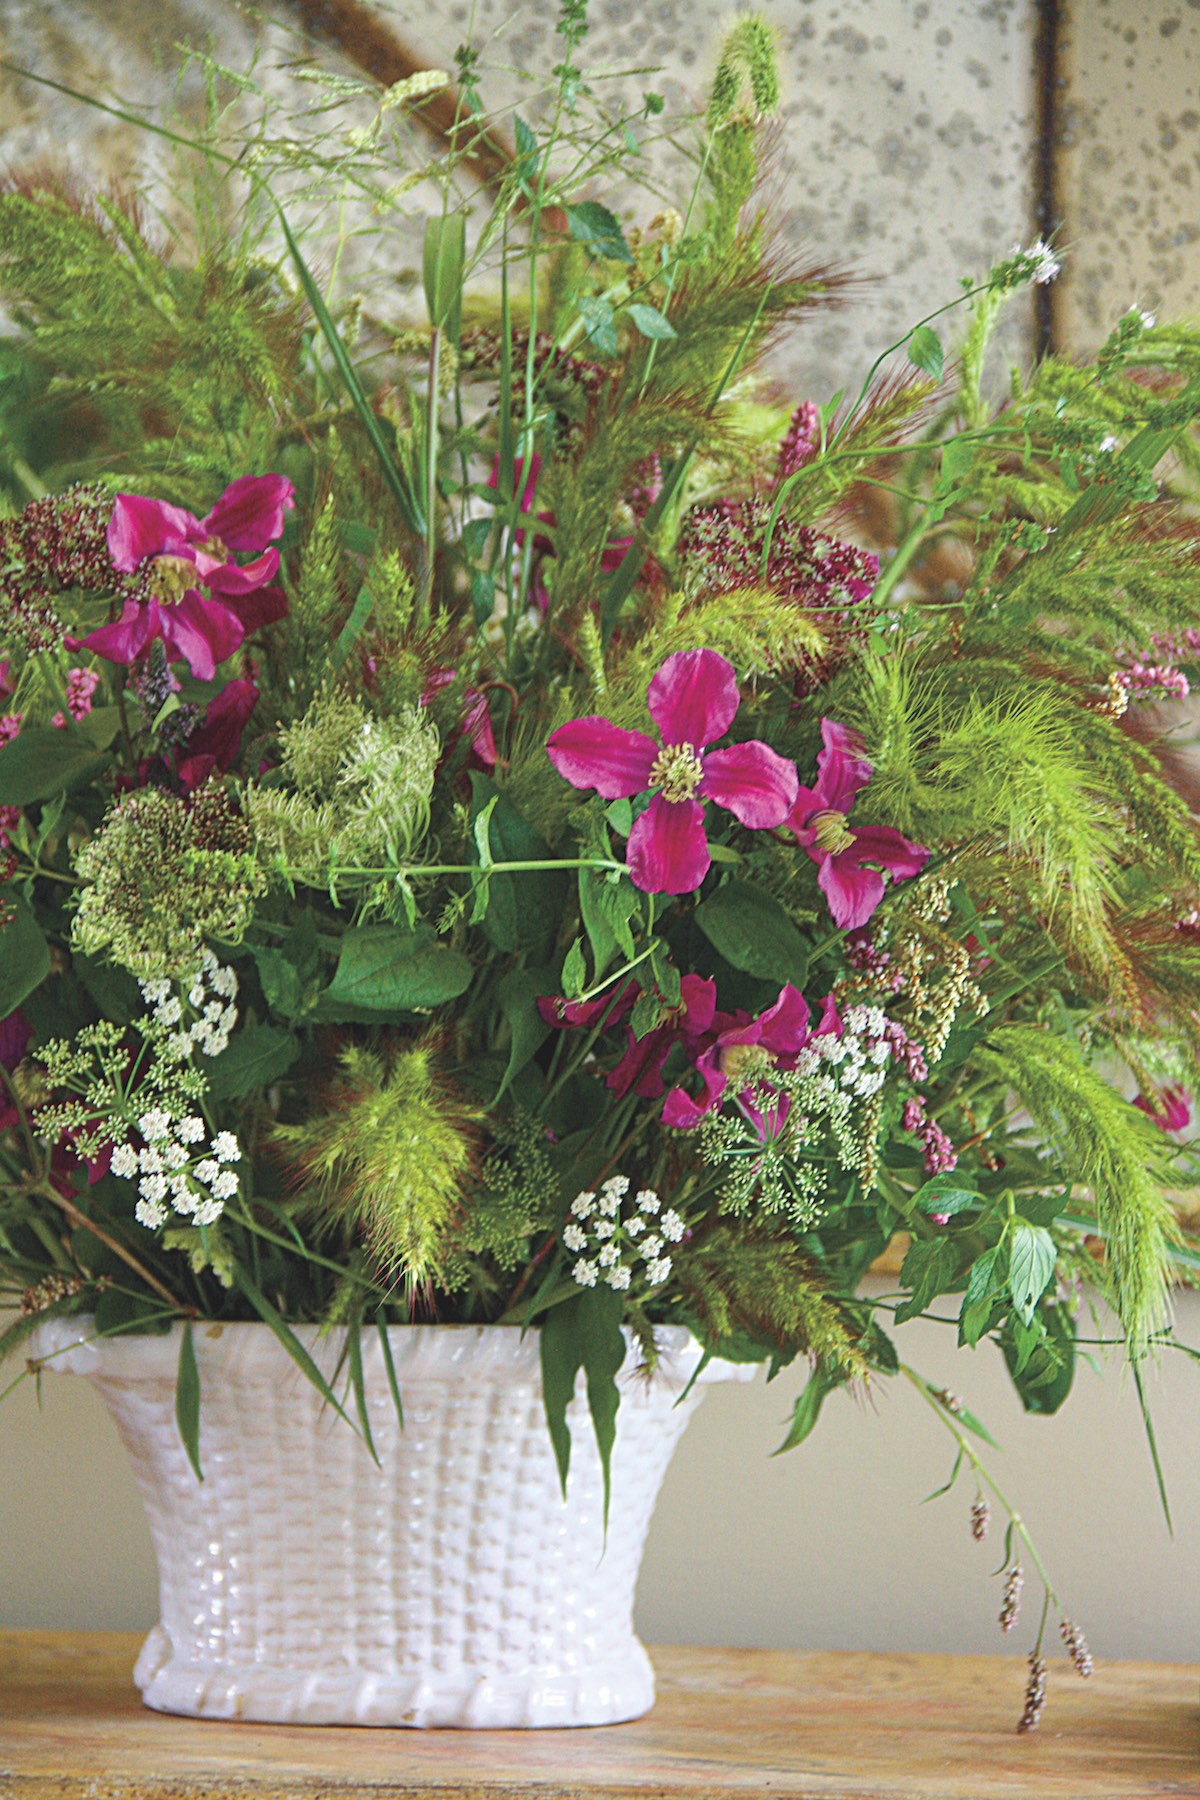 a porcelain basket with clematis, Queen Anne's lace, mint, and wild grasses.